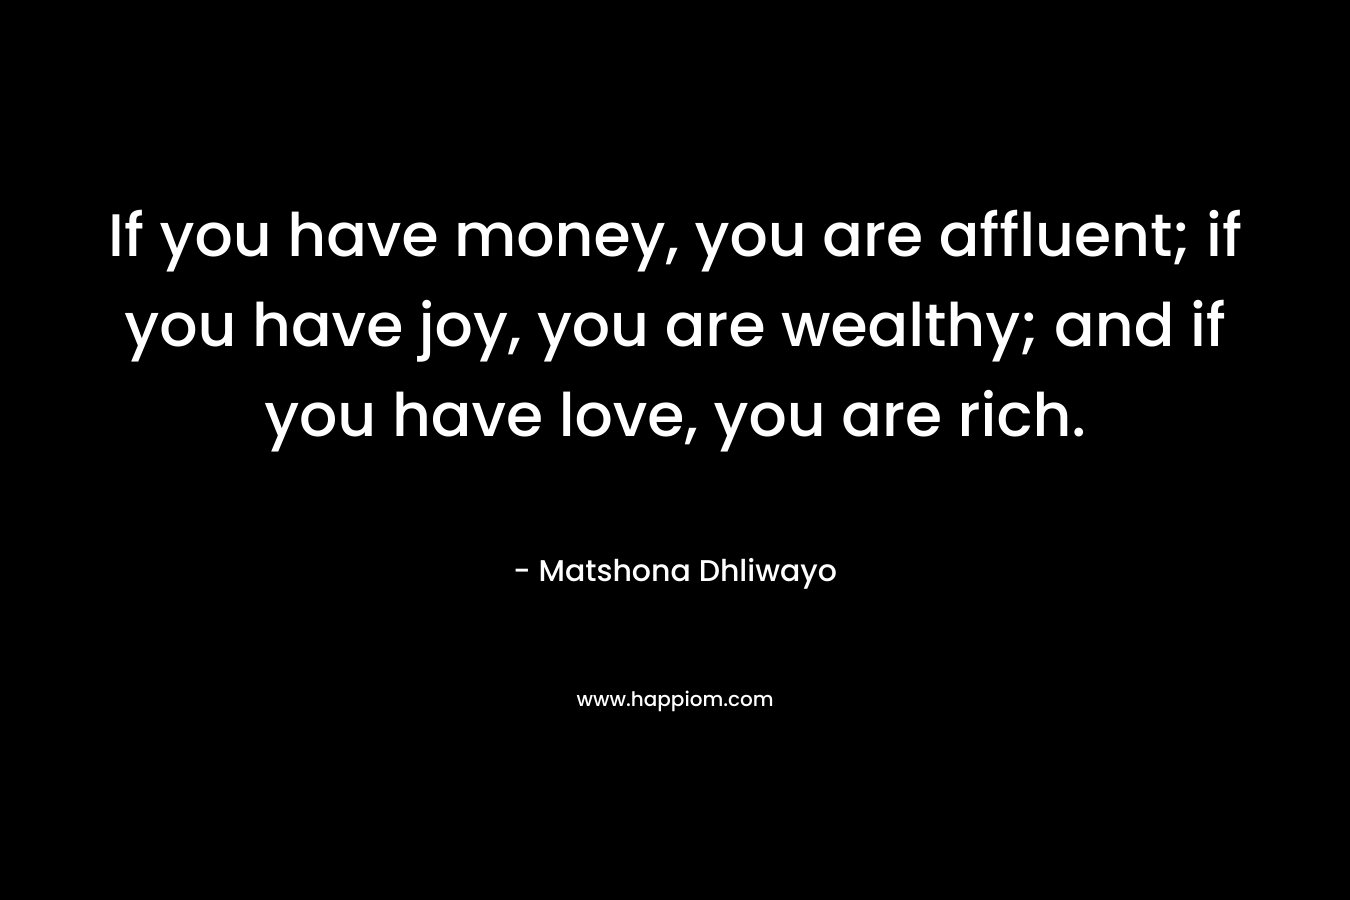 If you have money, you are affluent; if you have joy, you are wealthy; and if you have love, you are rich.